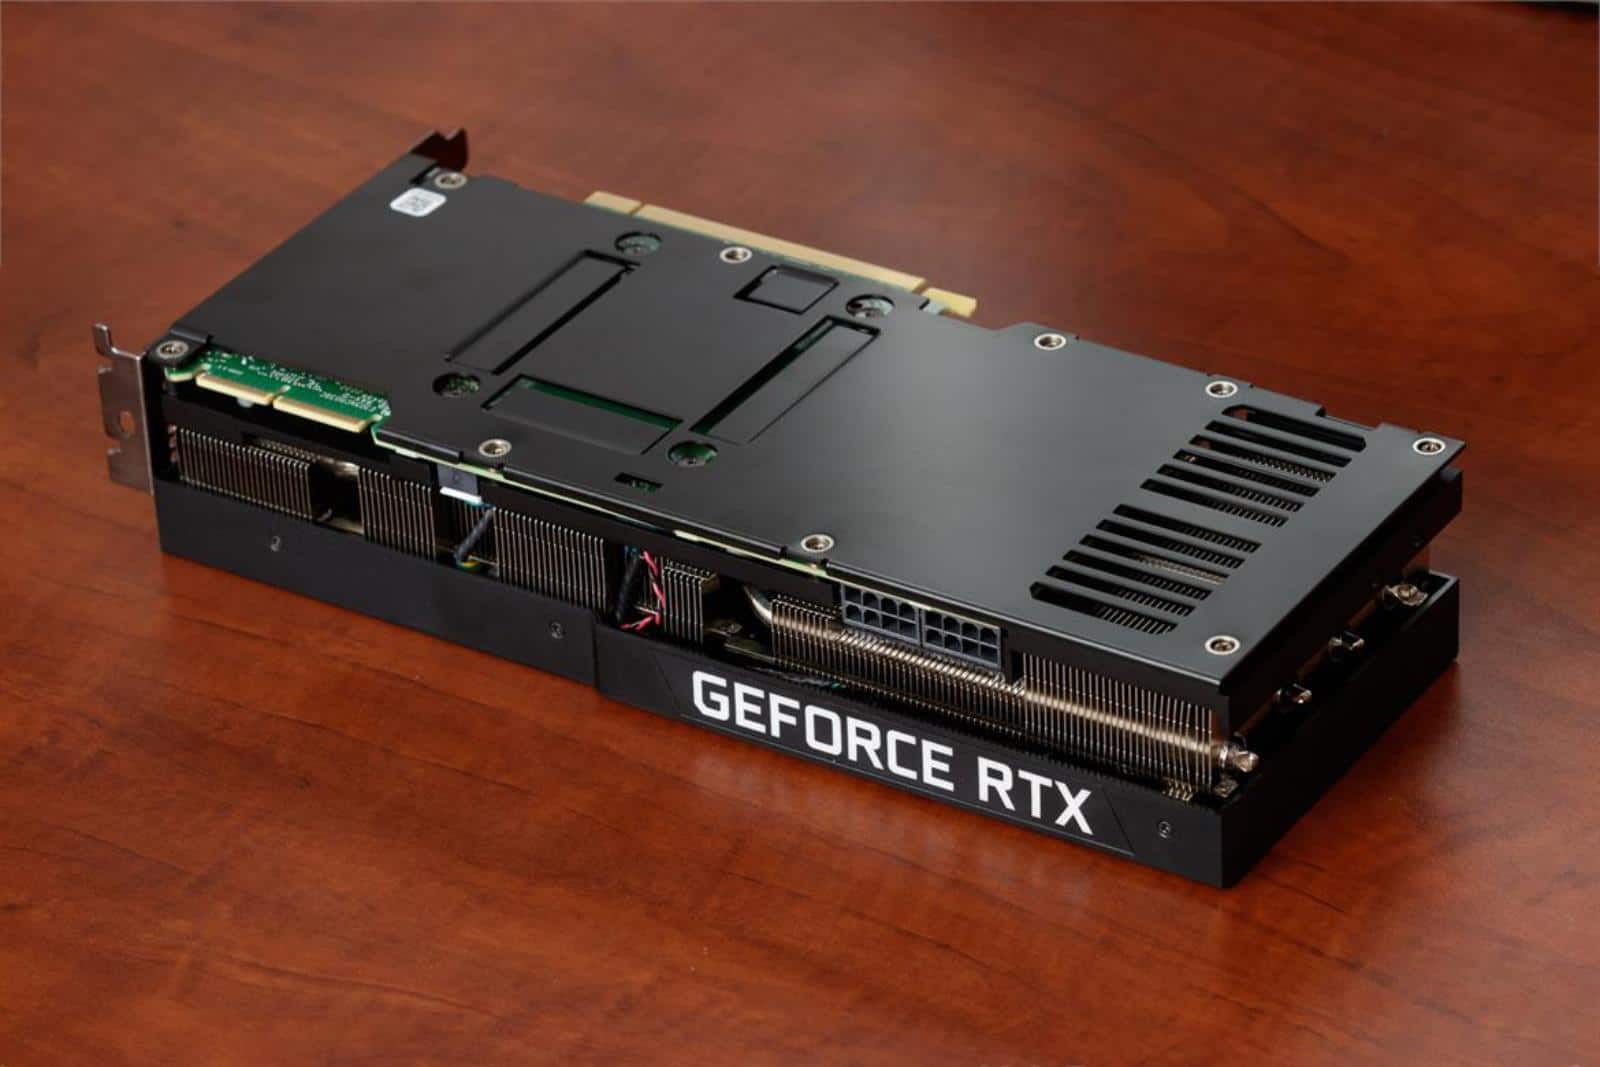 The new way to increase the mining performance of the GeForce RTX 3080 Ti takes a lot of risk